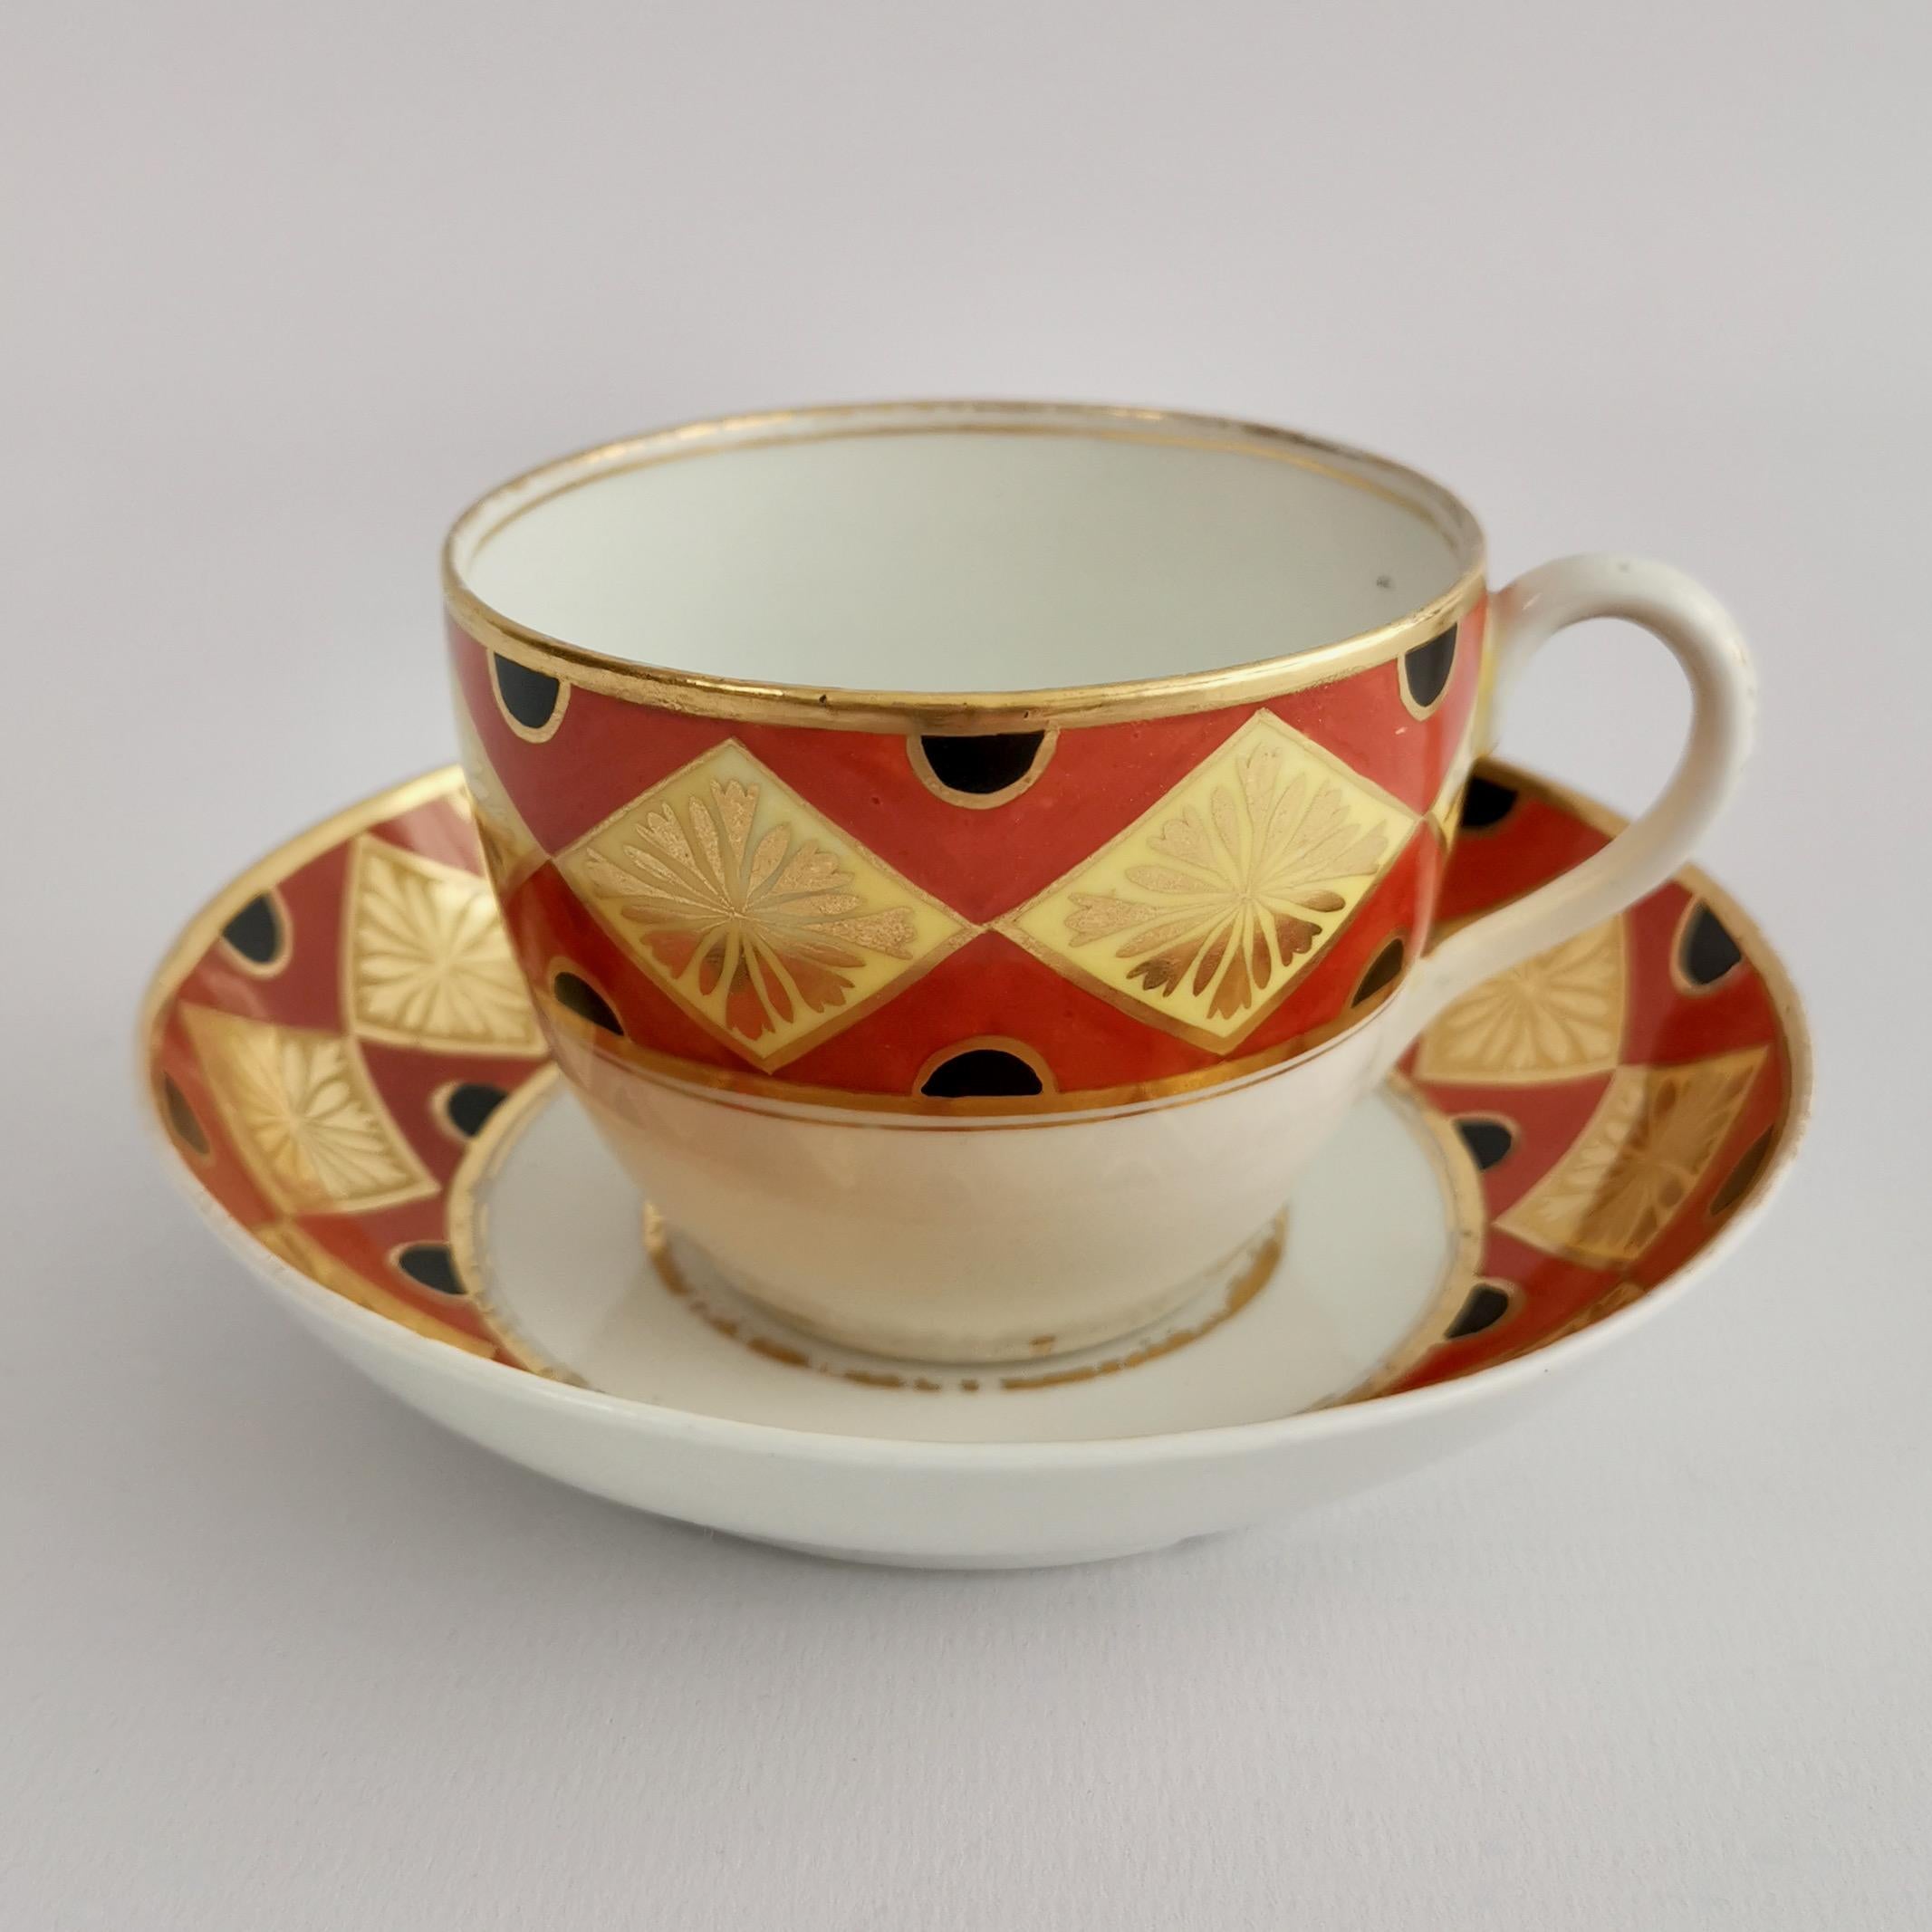 This is a very charming teacup and saucer made by Coalport in about 1805. The set is decorated with a bold New-classical decoration of a geometrical pattern in red, yellow, black and gilt. It is very well possible that this set was made by Thomas